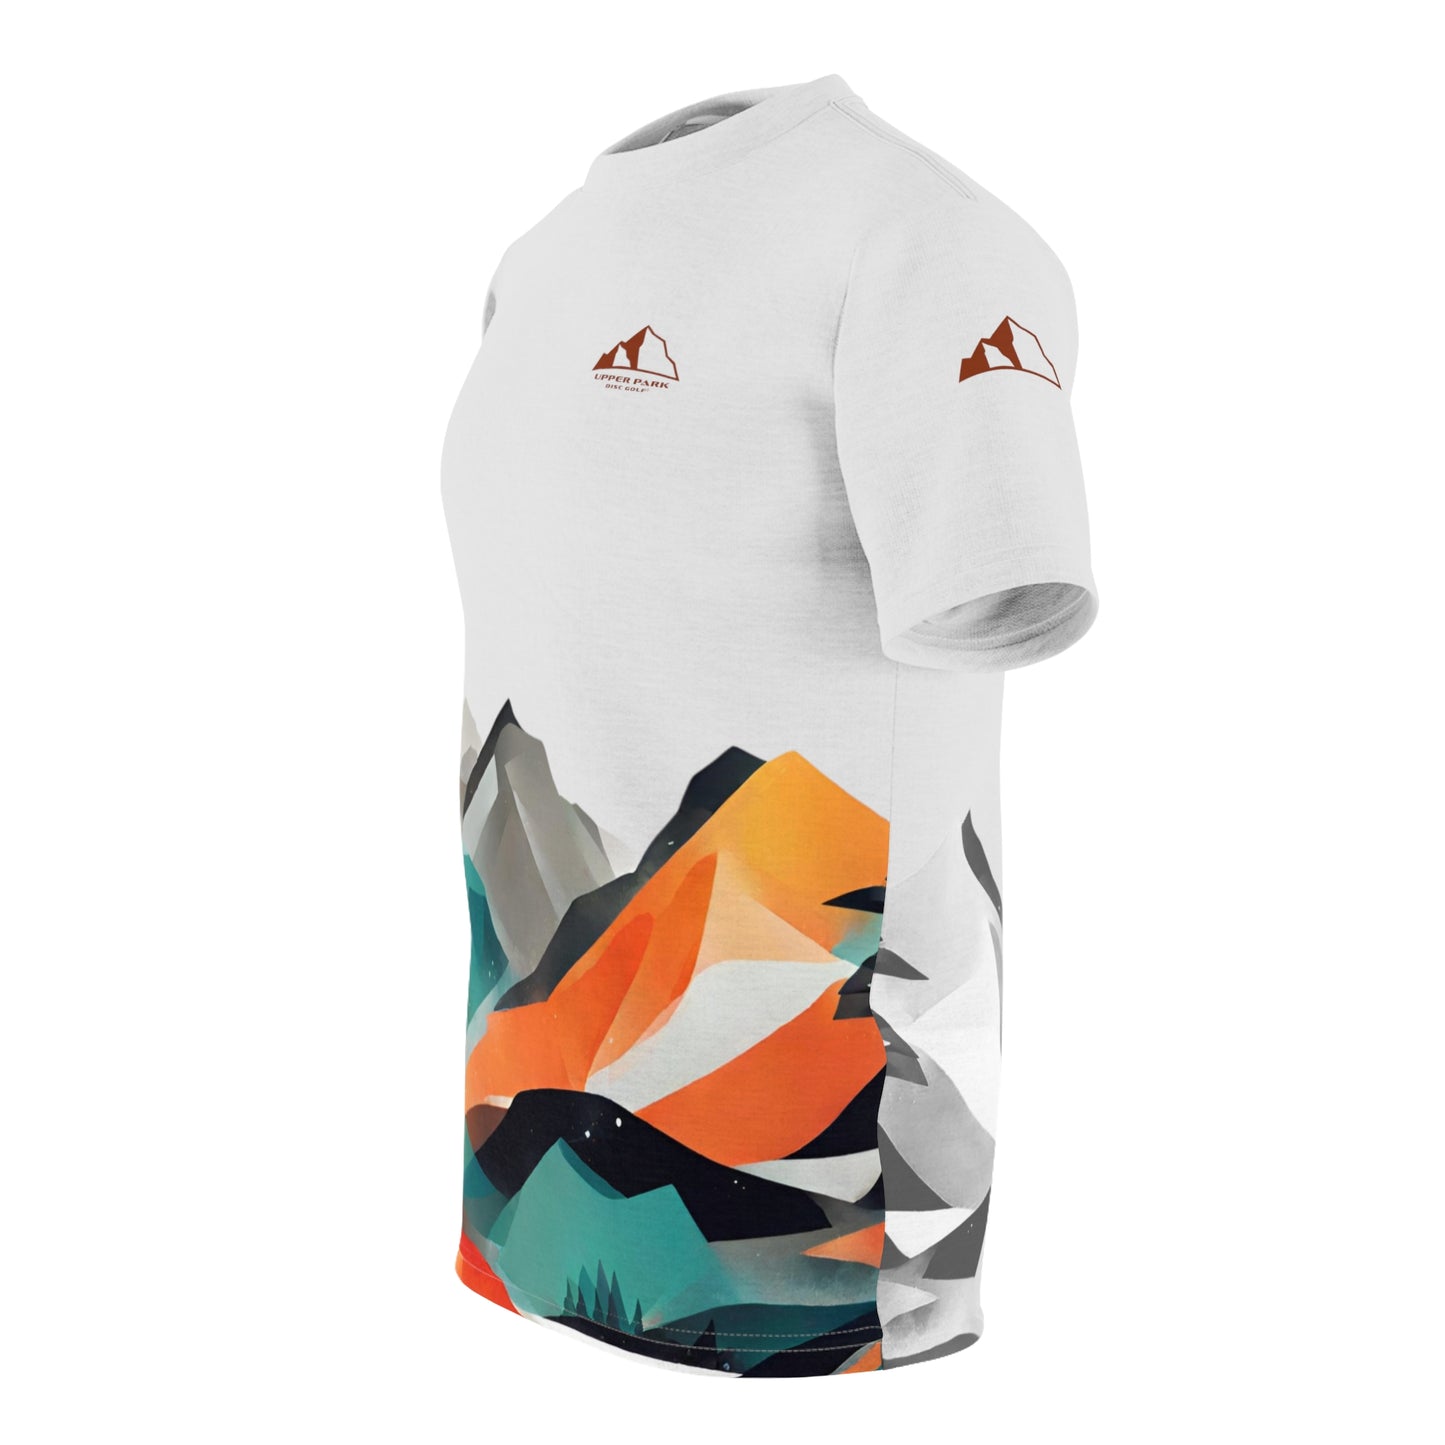 "Mountains & Trees Abstract" Unisex Microfiber Jersey